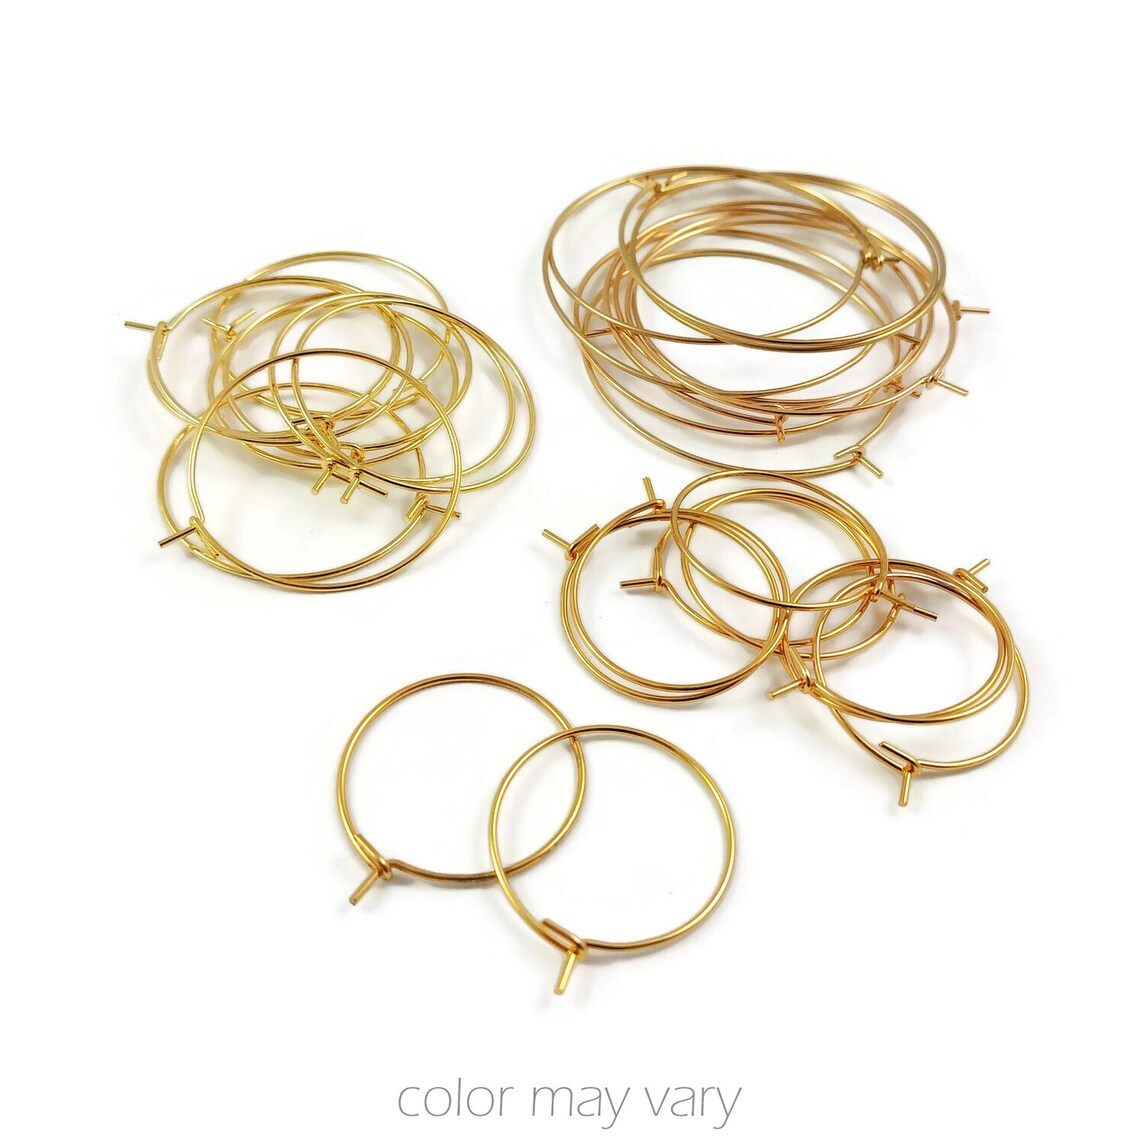 10 Gold stainless steel hoops - Five sizes available